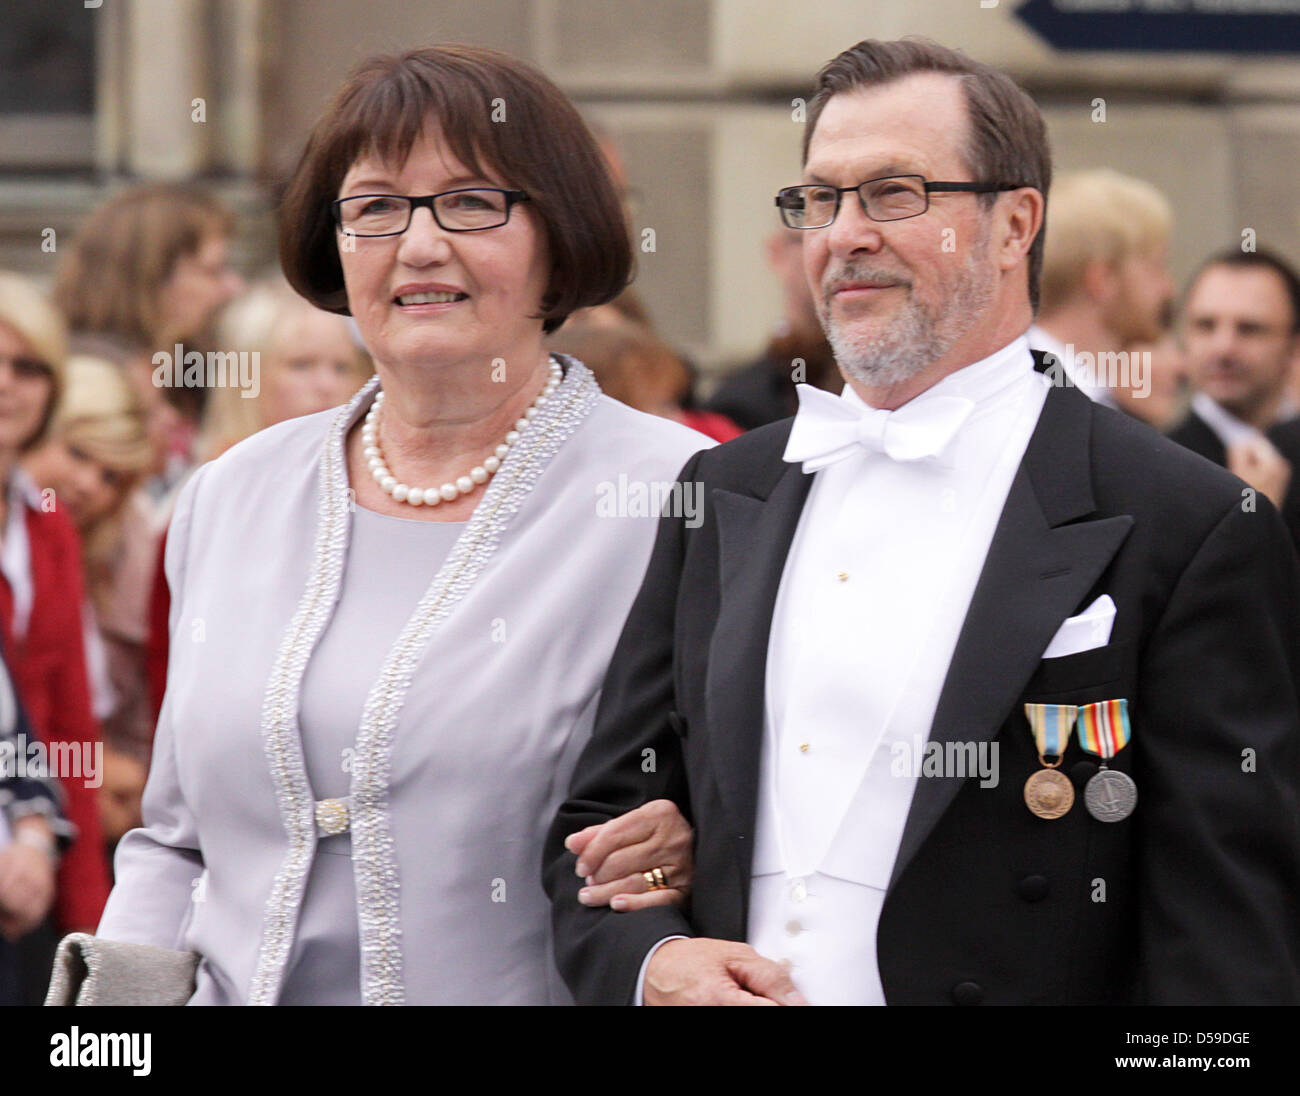 The parents of the groom, Olle and Eva Westling arrive for the wedding of Crown Princess Victoria of Sweden and Daniel Westling in Stockholm, Sweden, 19 June 2010. Photo: Albert Nieboer (NETHERLANDS OUT) Stock Photo